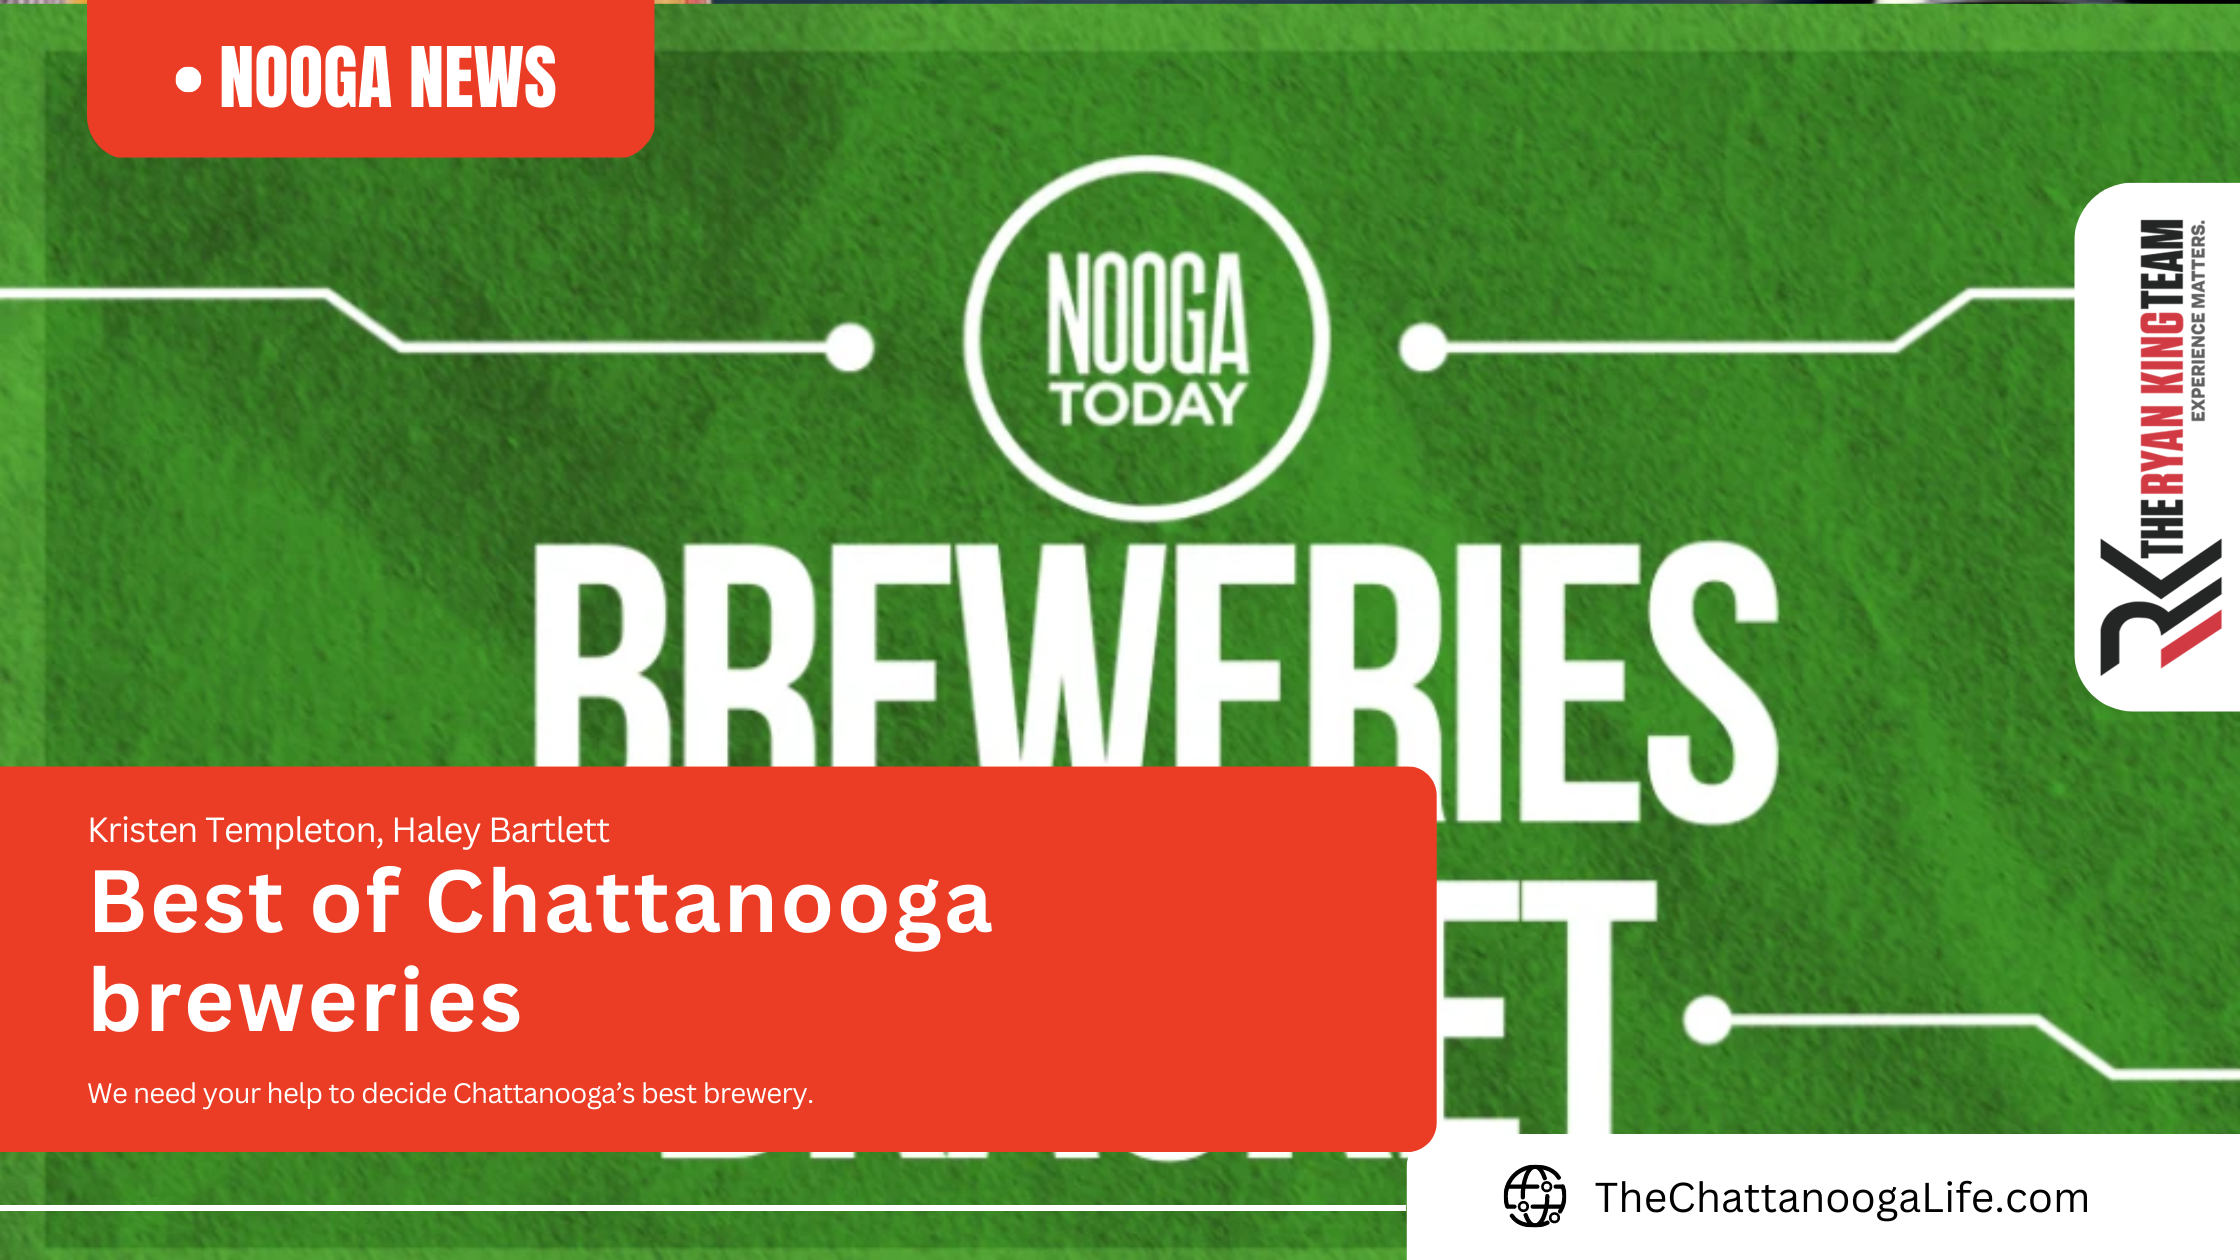 Best of Chattanooga breweries